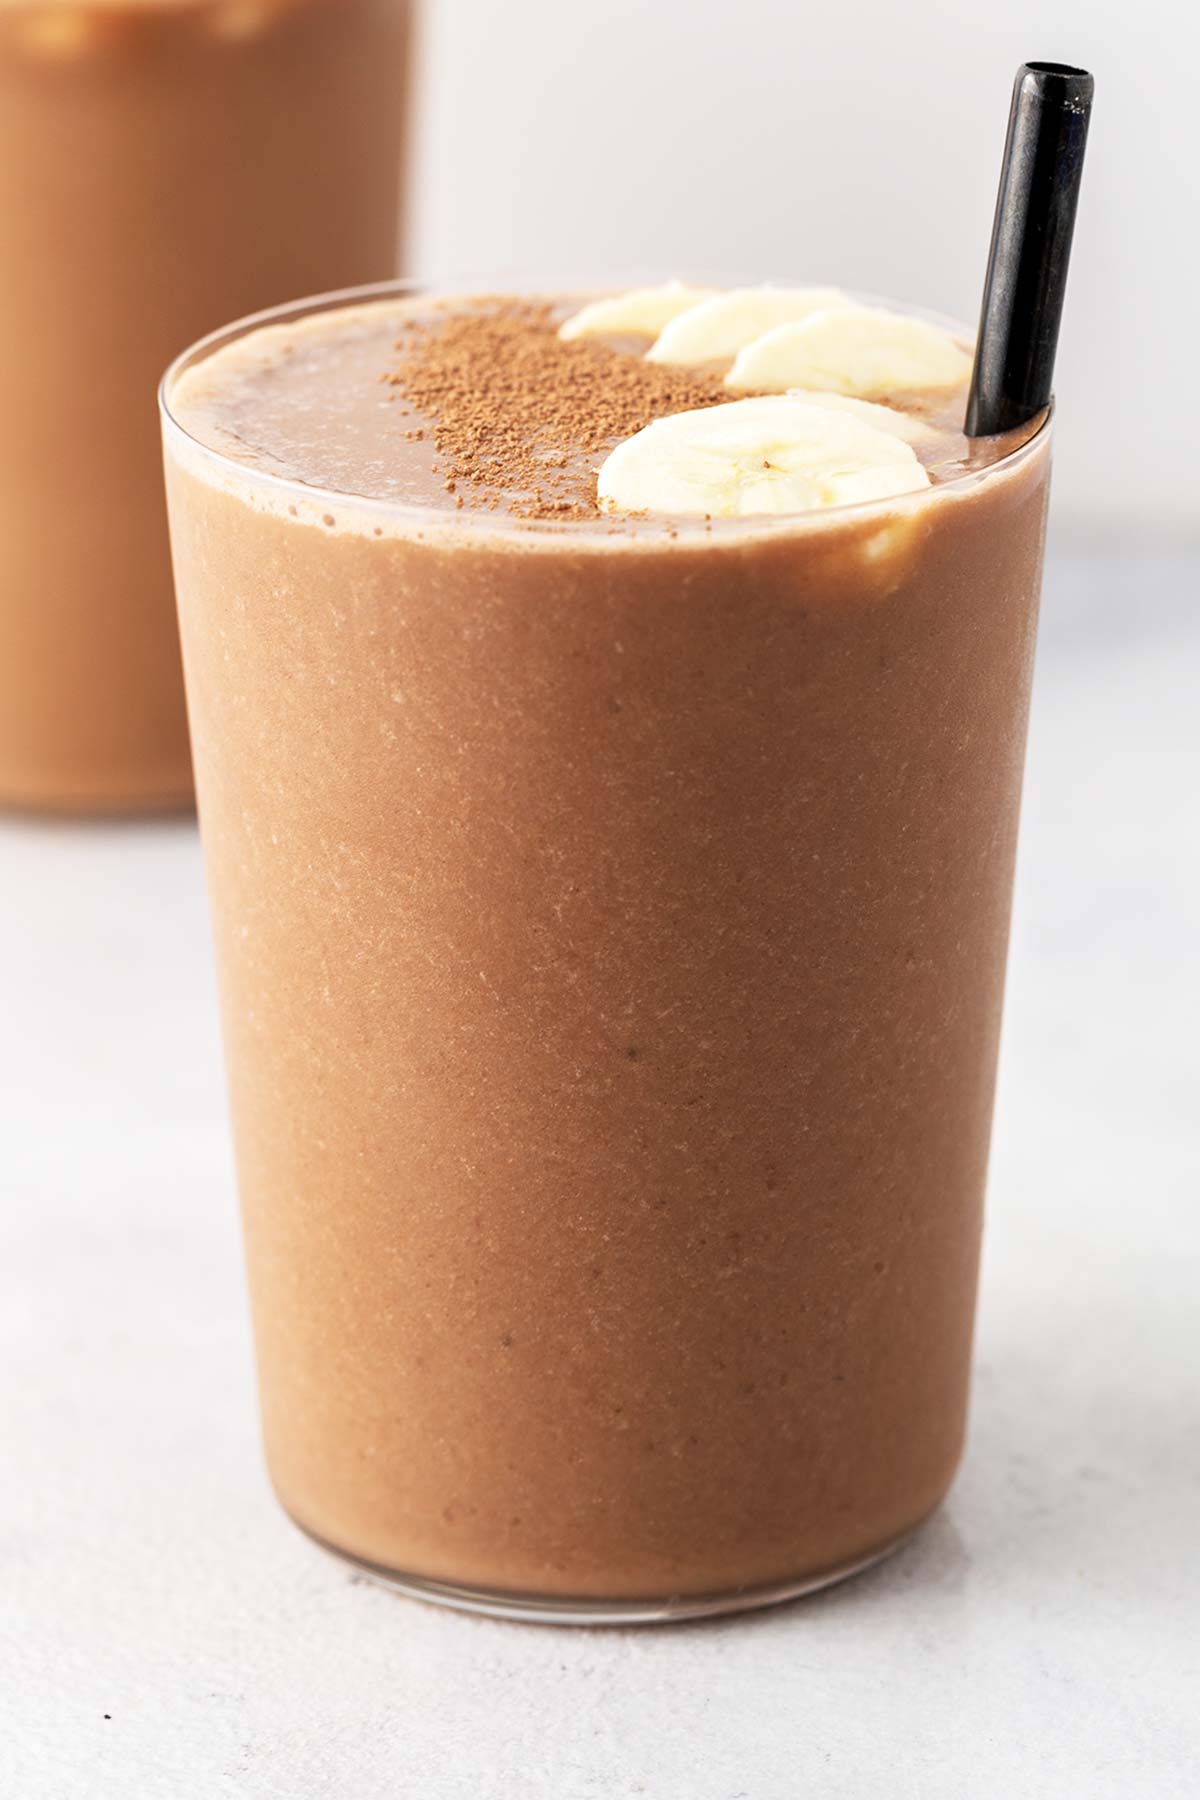 Chocolate collagen smoothie in a glass.